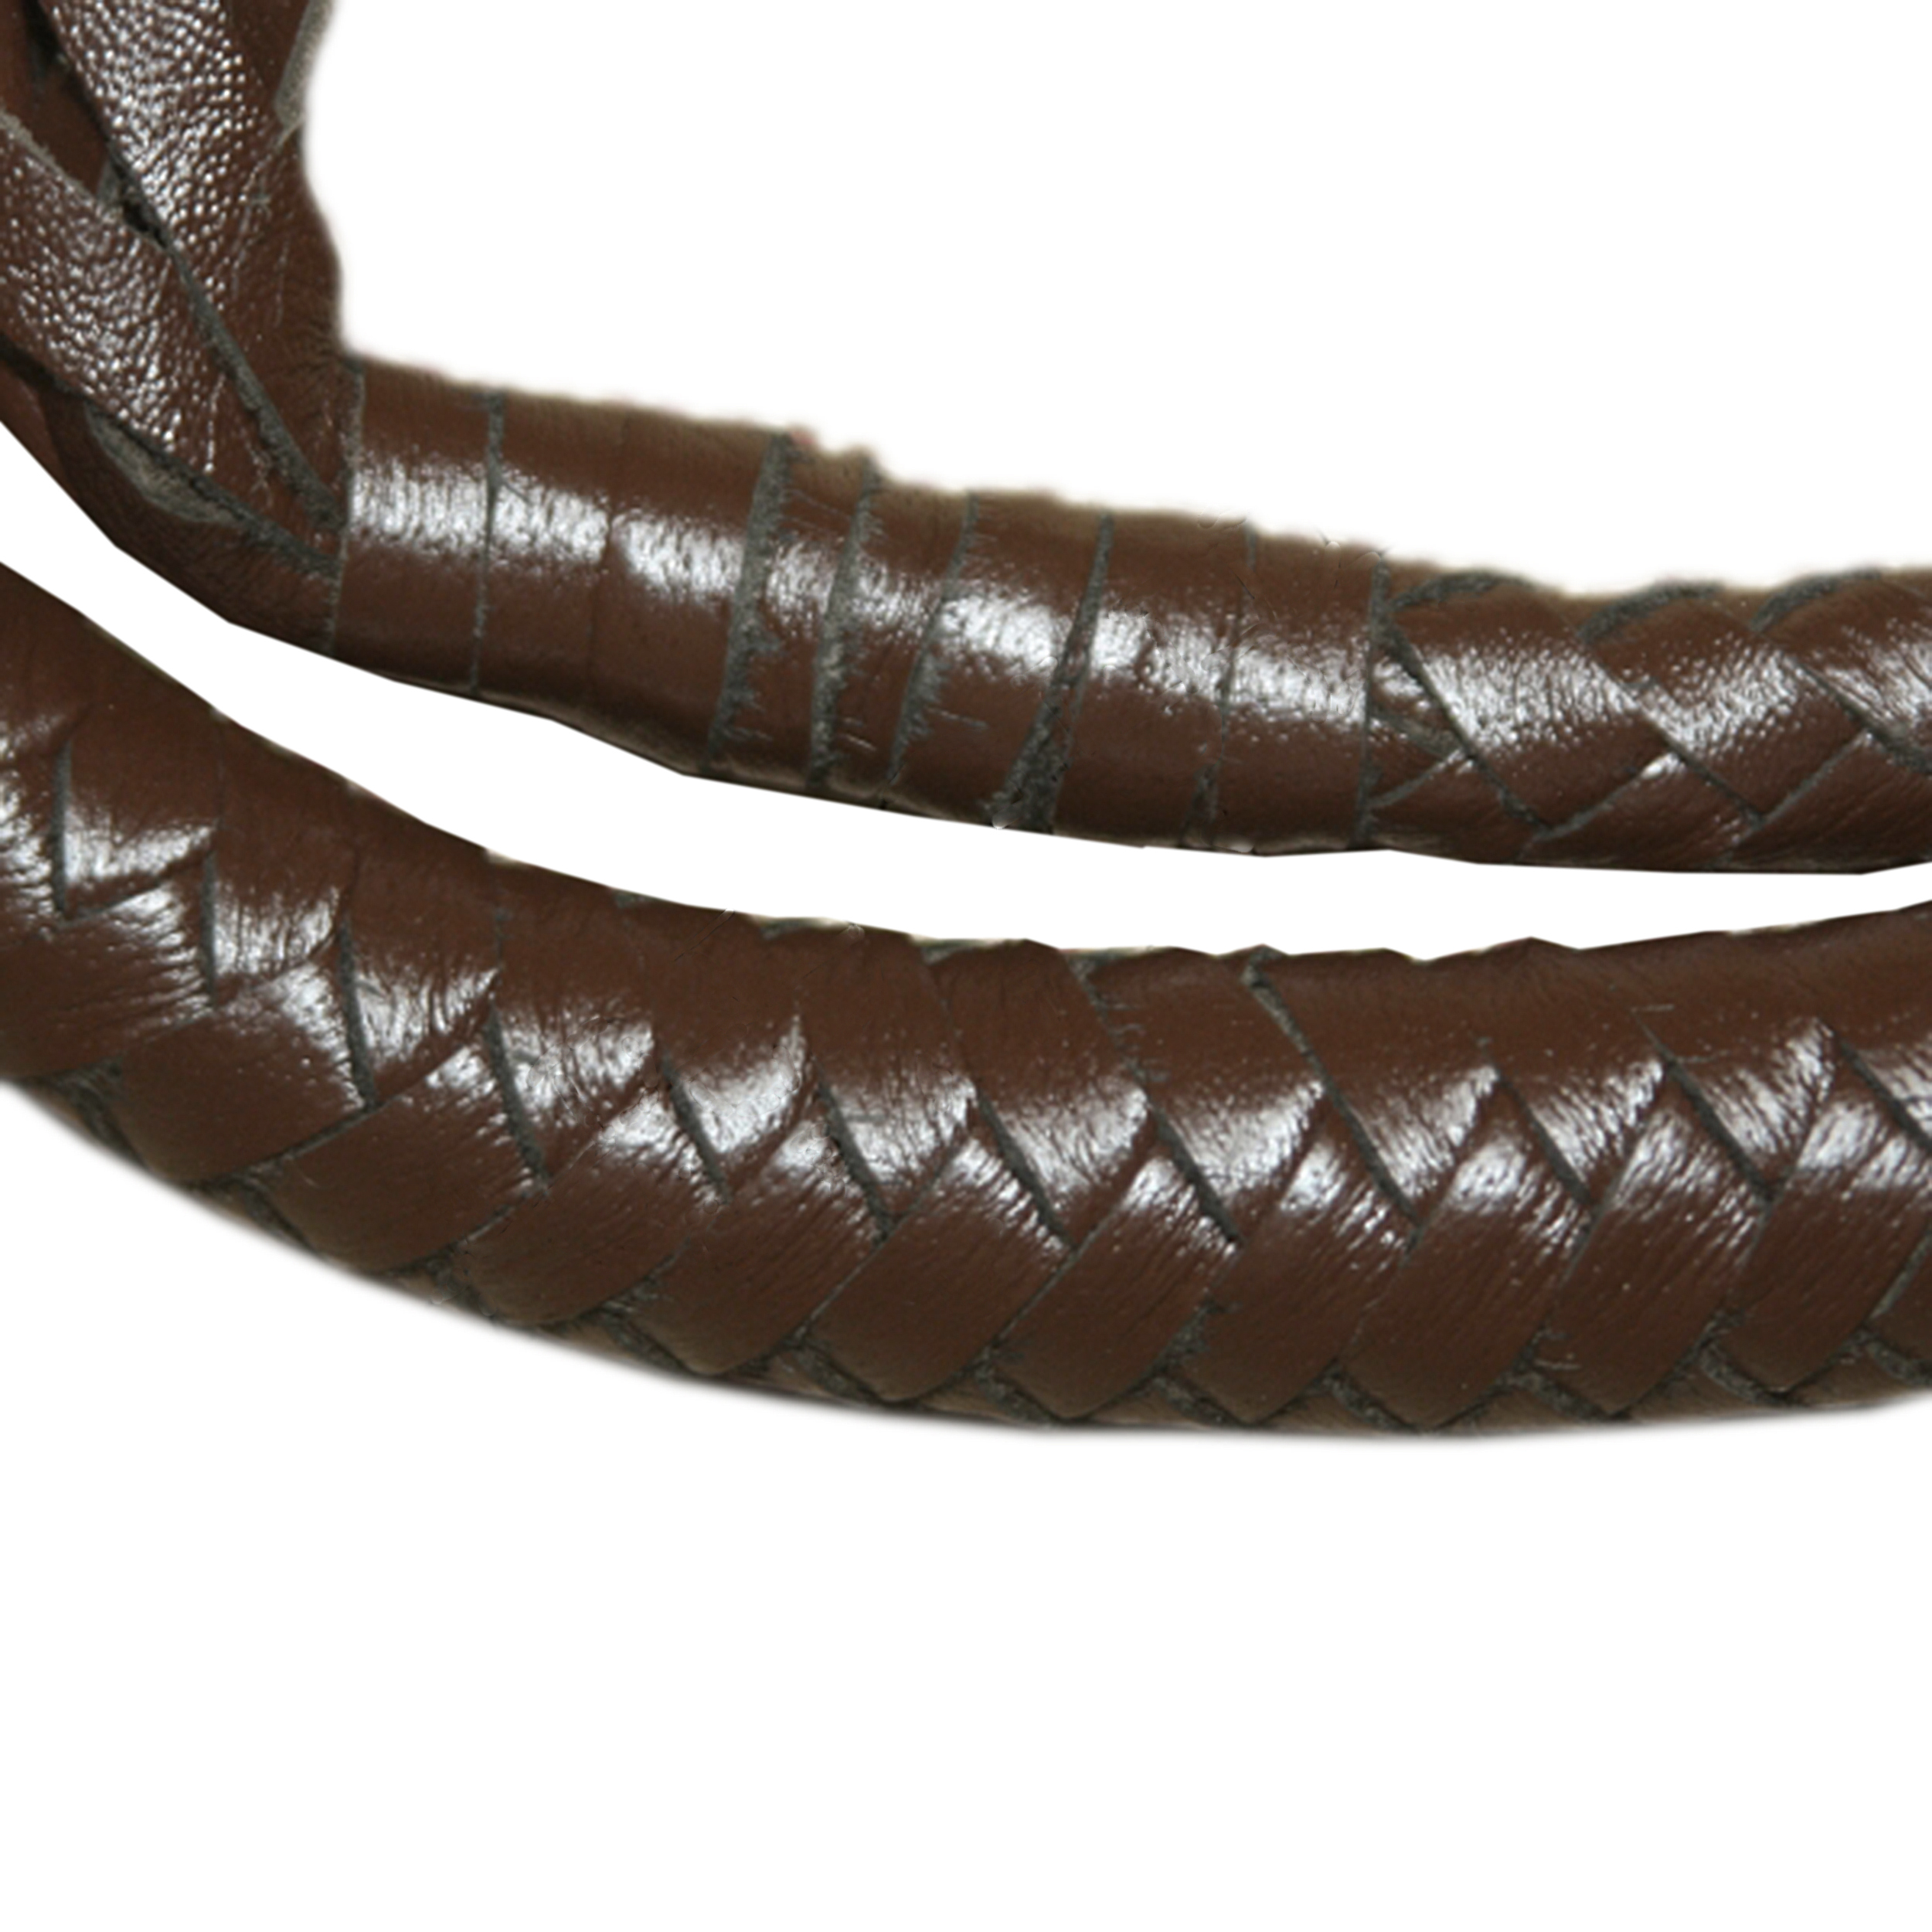 Indiana Jones Style 8 Foot 8 Plait Tan Brown Leather Bullwhip Real Genuine Cowhide Leather Bull Whip